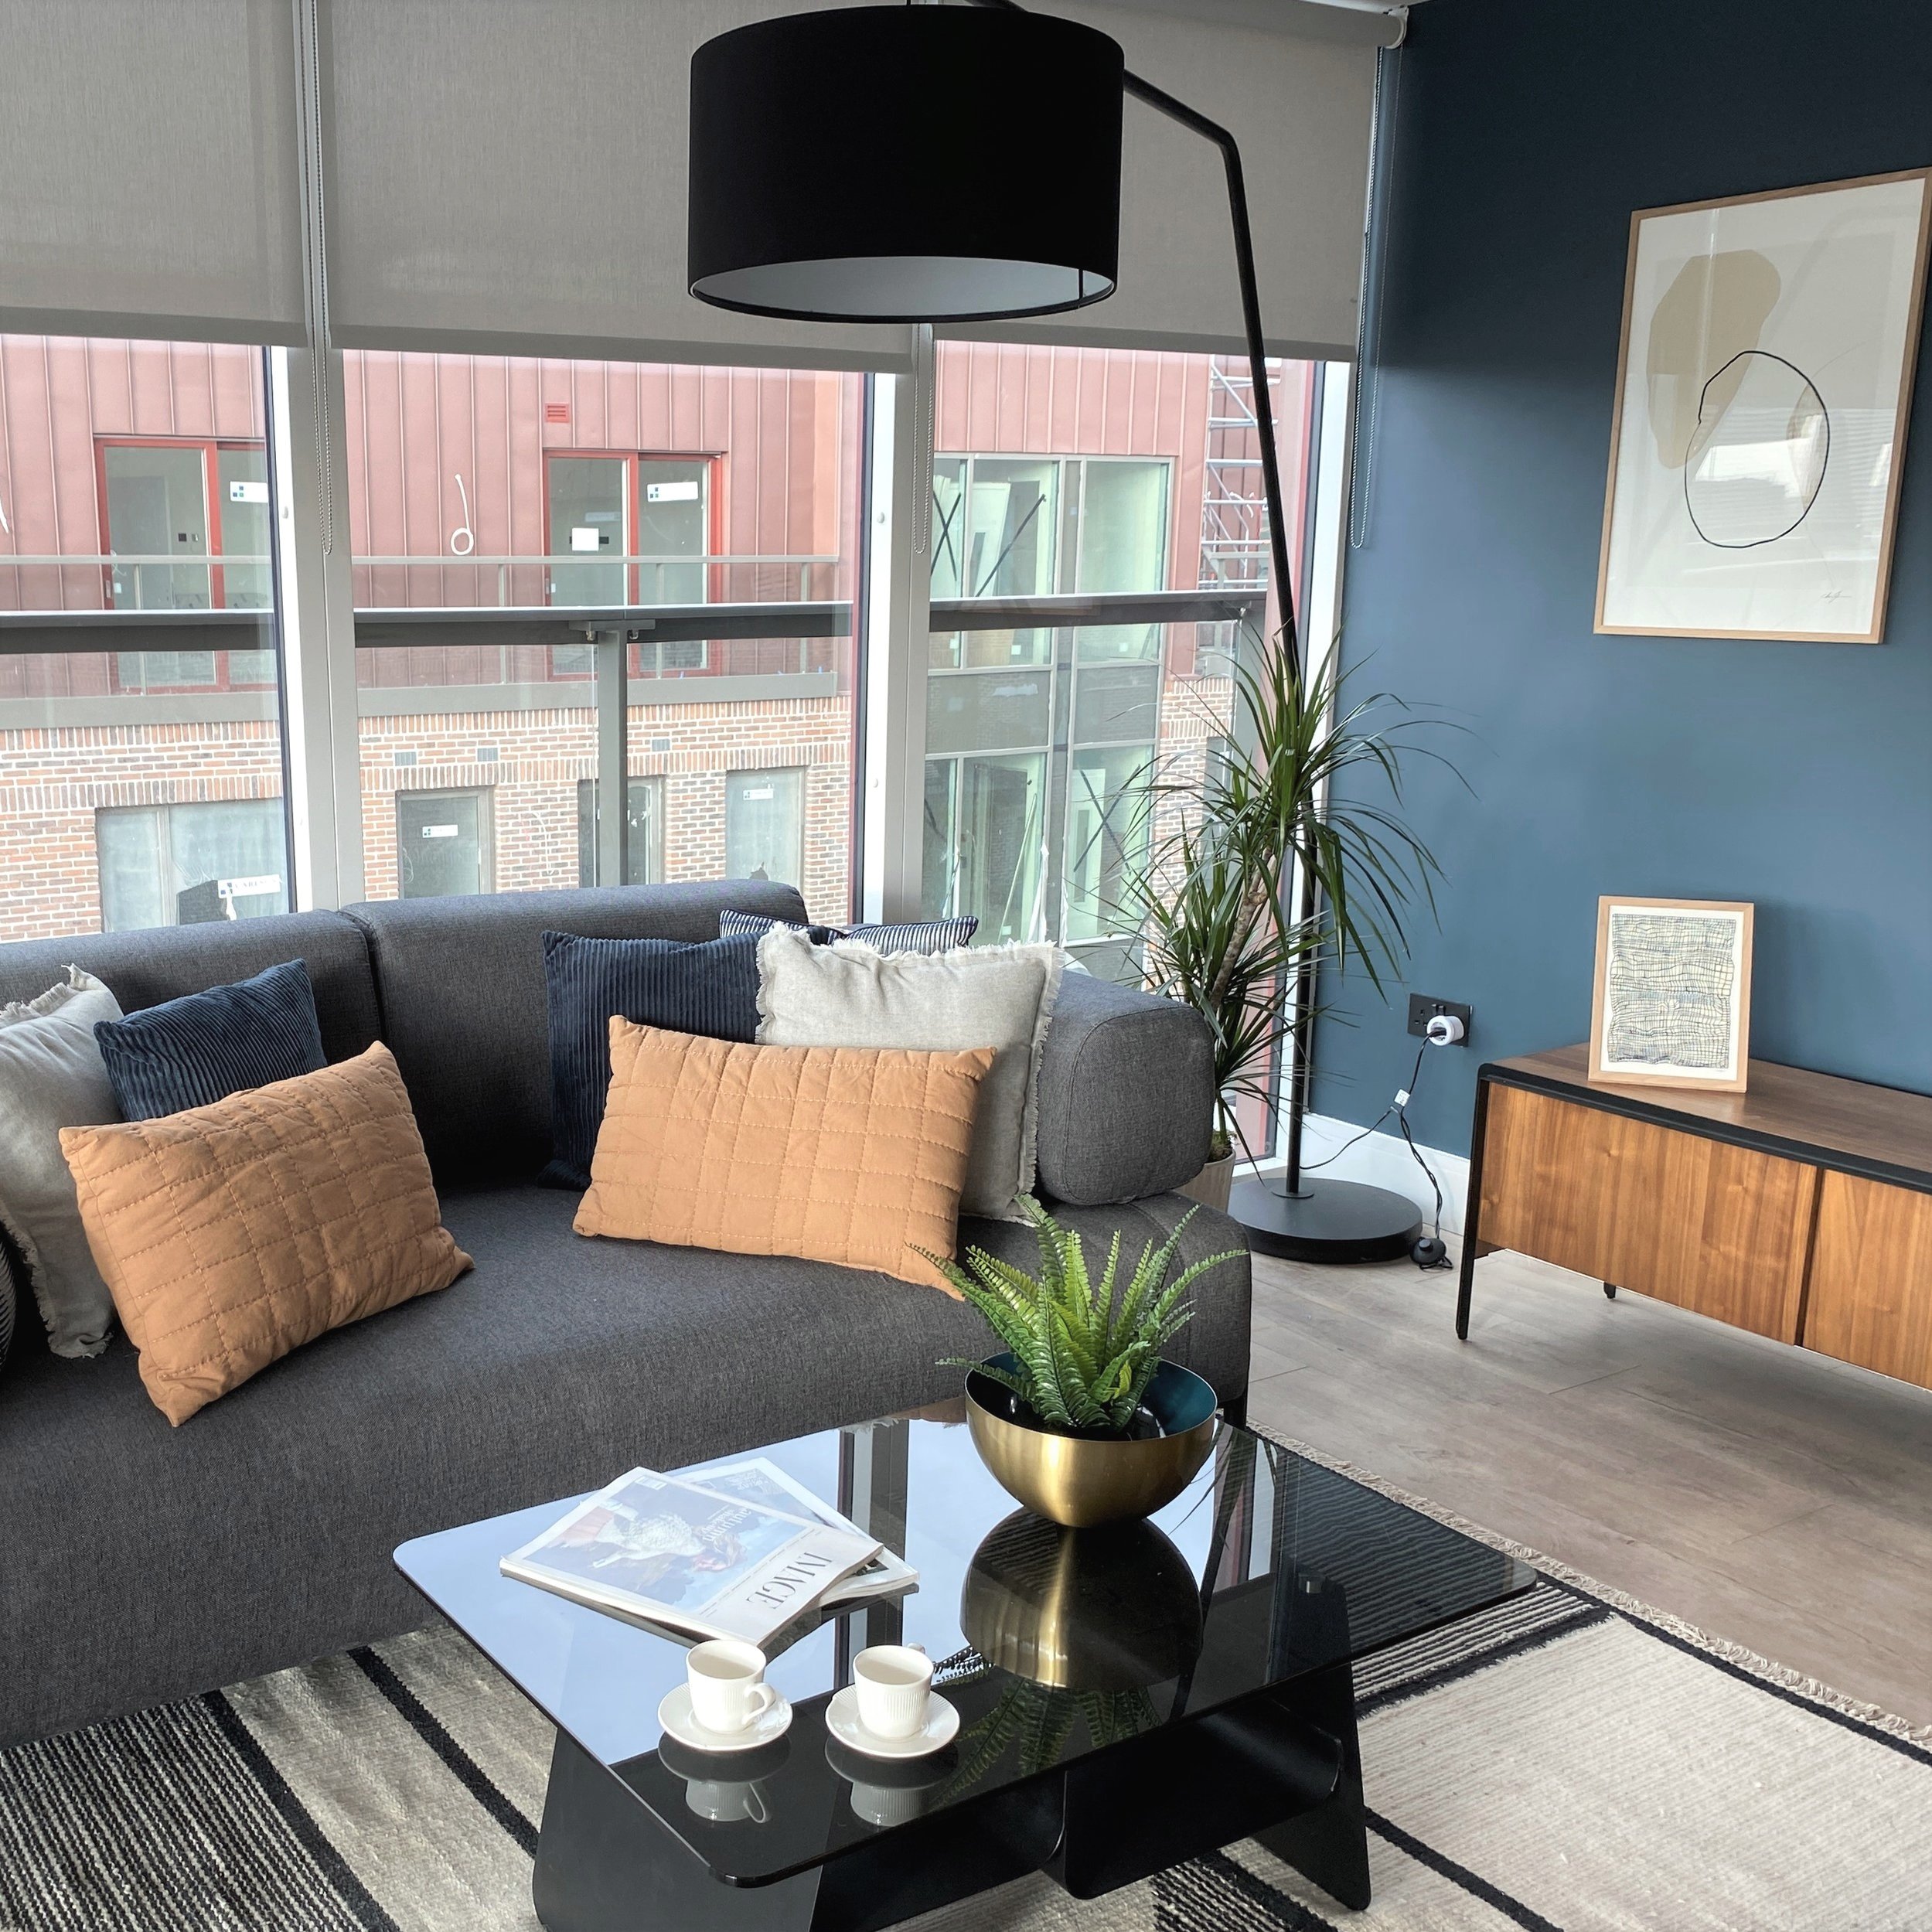 PRS Scheme Dublin, Interior fit-out and showhome, Apartment in Dublin for Large PRS Private Rental Sector Scheme. Contemporary apartment Dublin